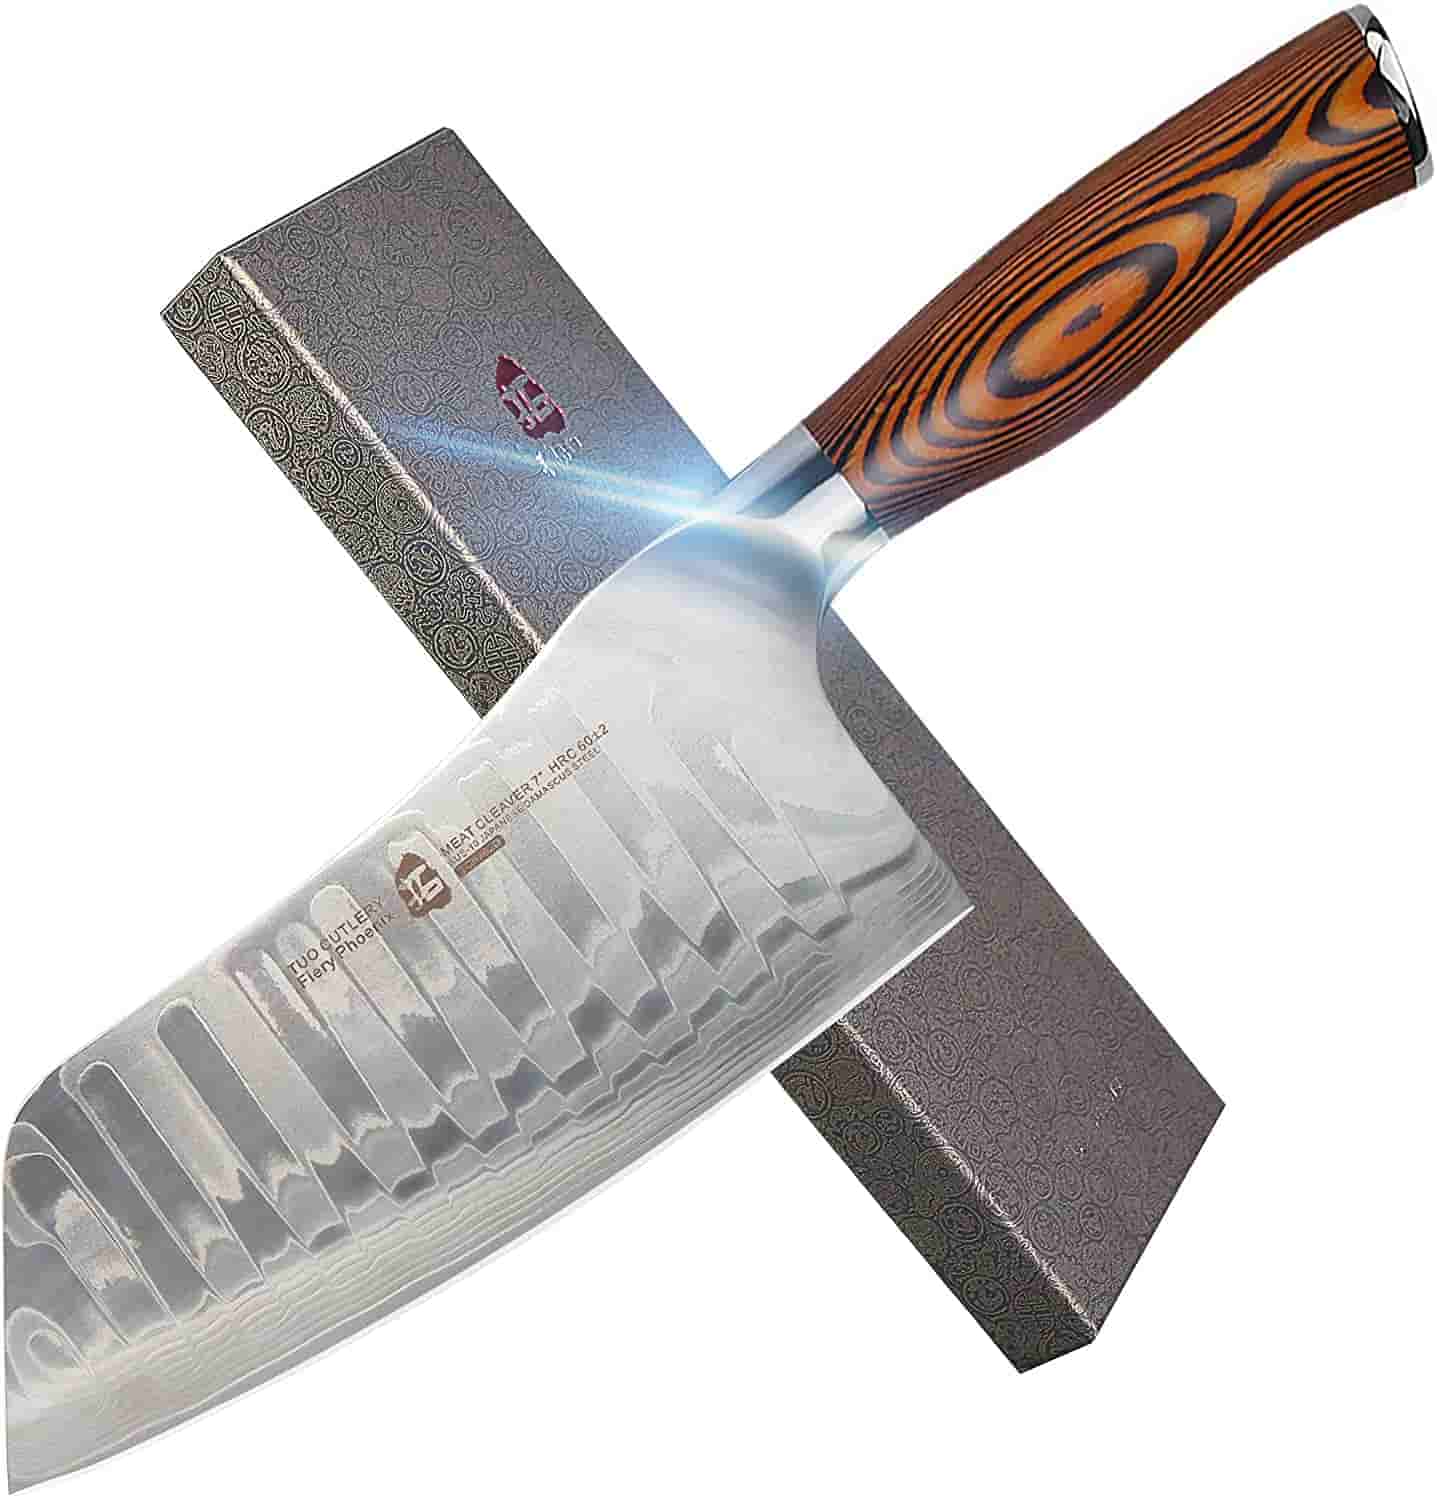 Damascus Steel - Chinese Chef's Knife